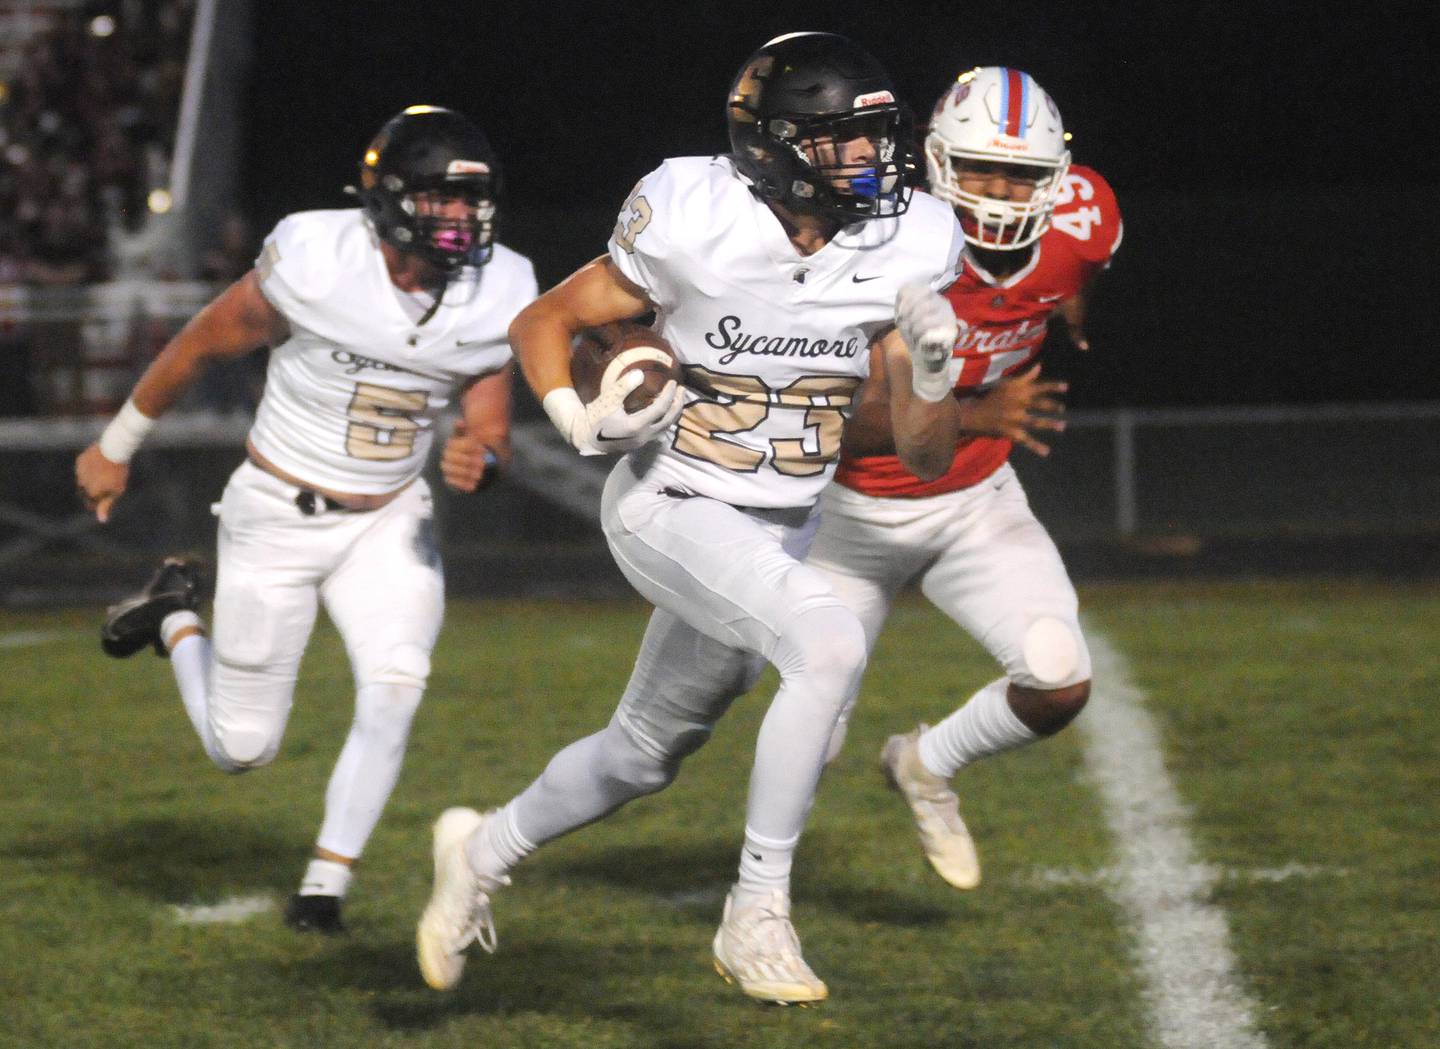 Sycamore's Dylan Hodges outruns Streator's Hector Valdez for a touchdown at King Field on Friday, Sept. 15, 2023.